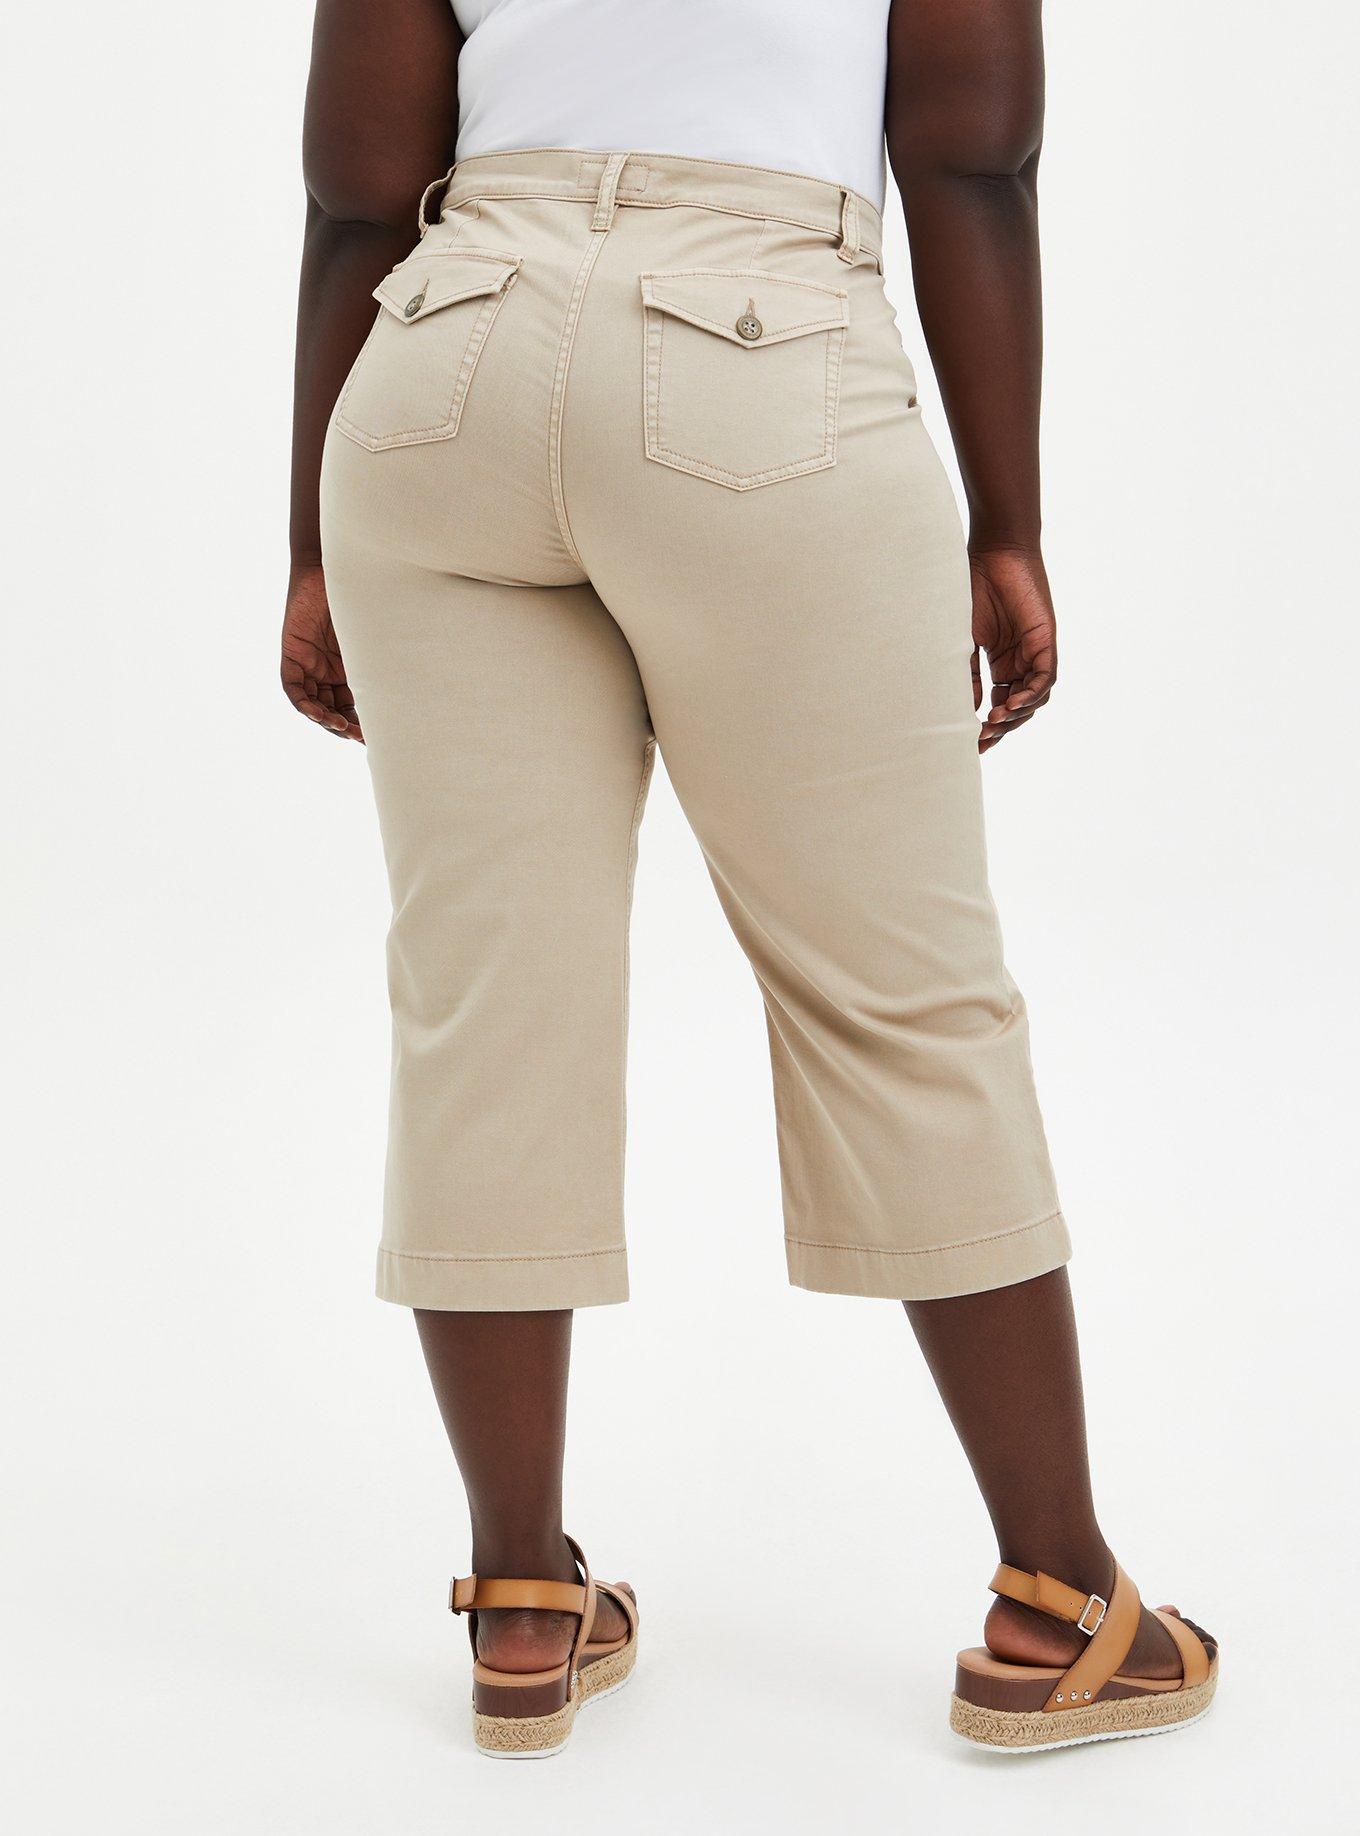 RealSize Womens 2 Pocket Stretch Pull On Pants Lesotho